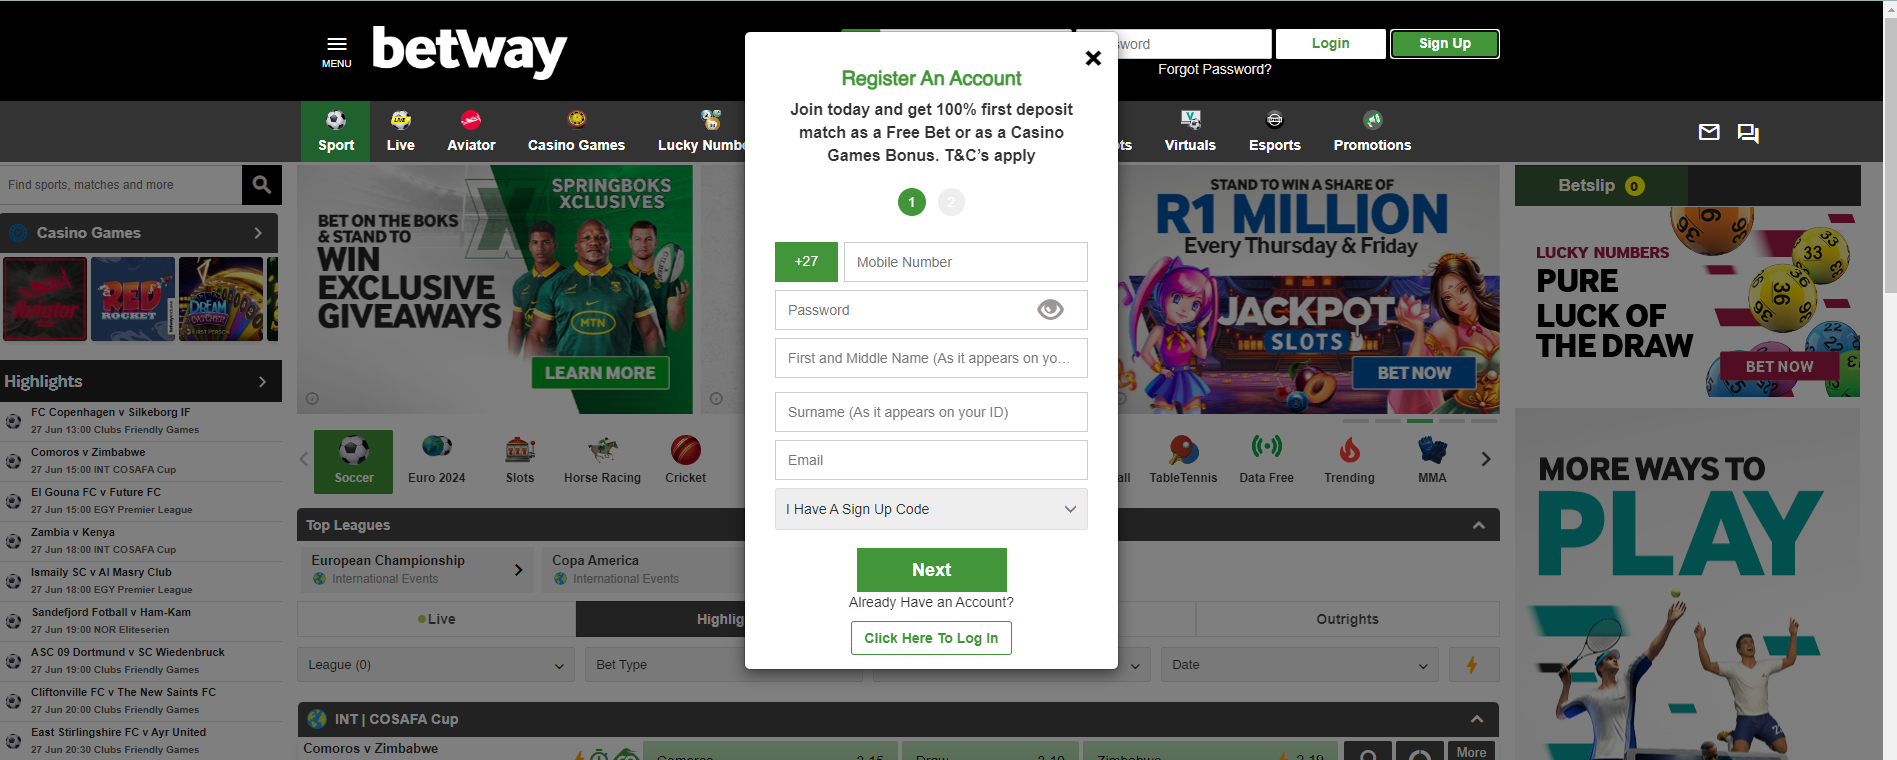 Betway sign up form